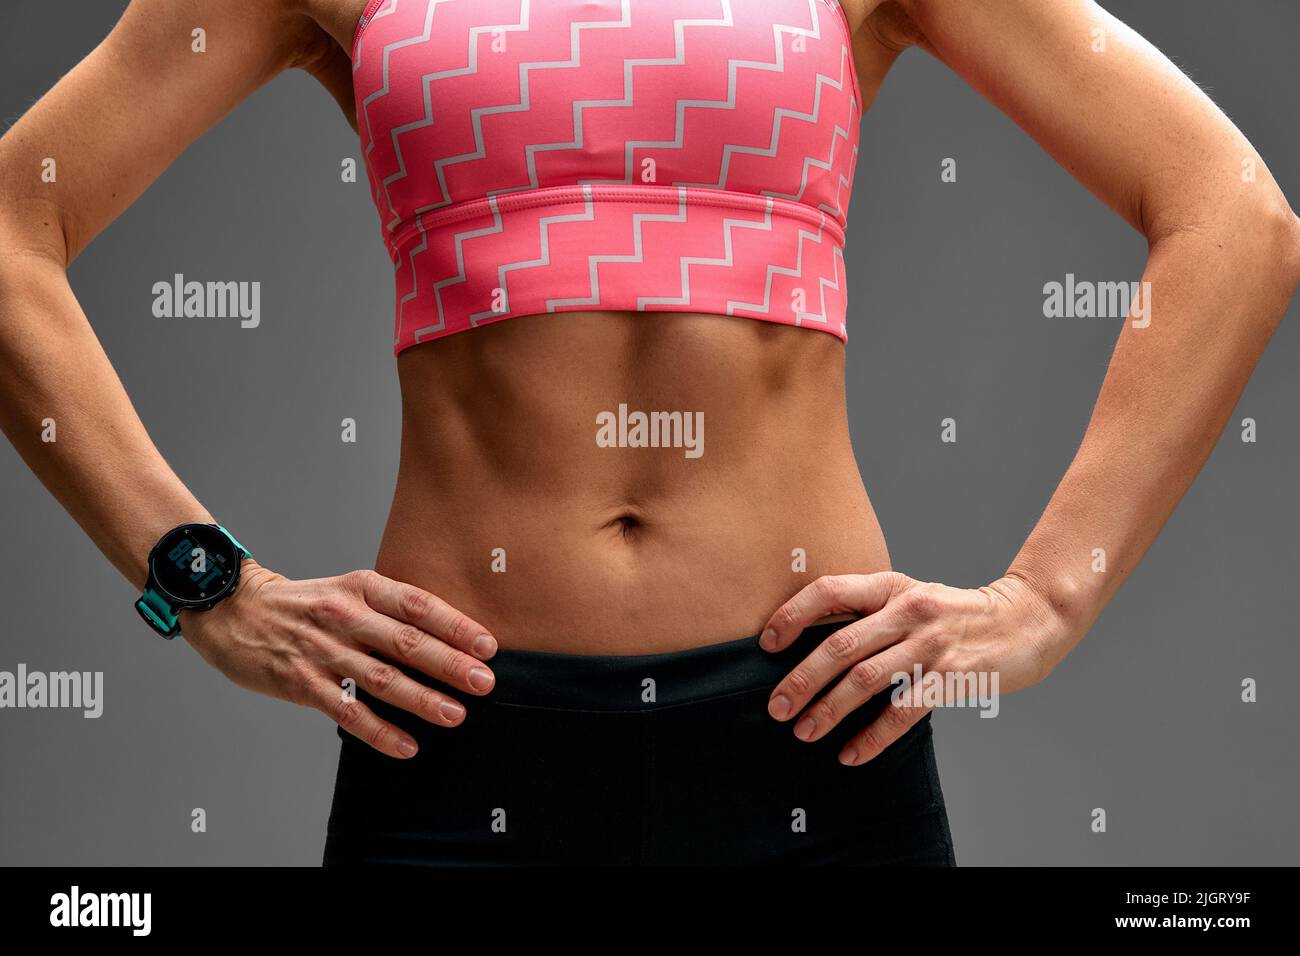 Free Photo  Cropped close up body of fit woman wearing shorts and sport  top showing slim beautiful stomach and abs